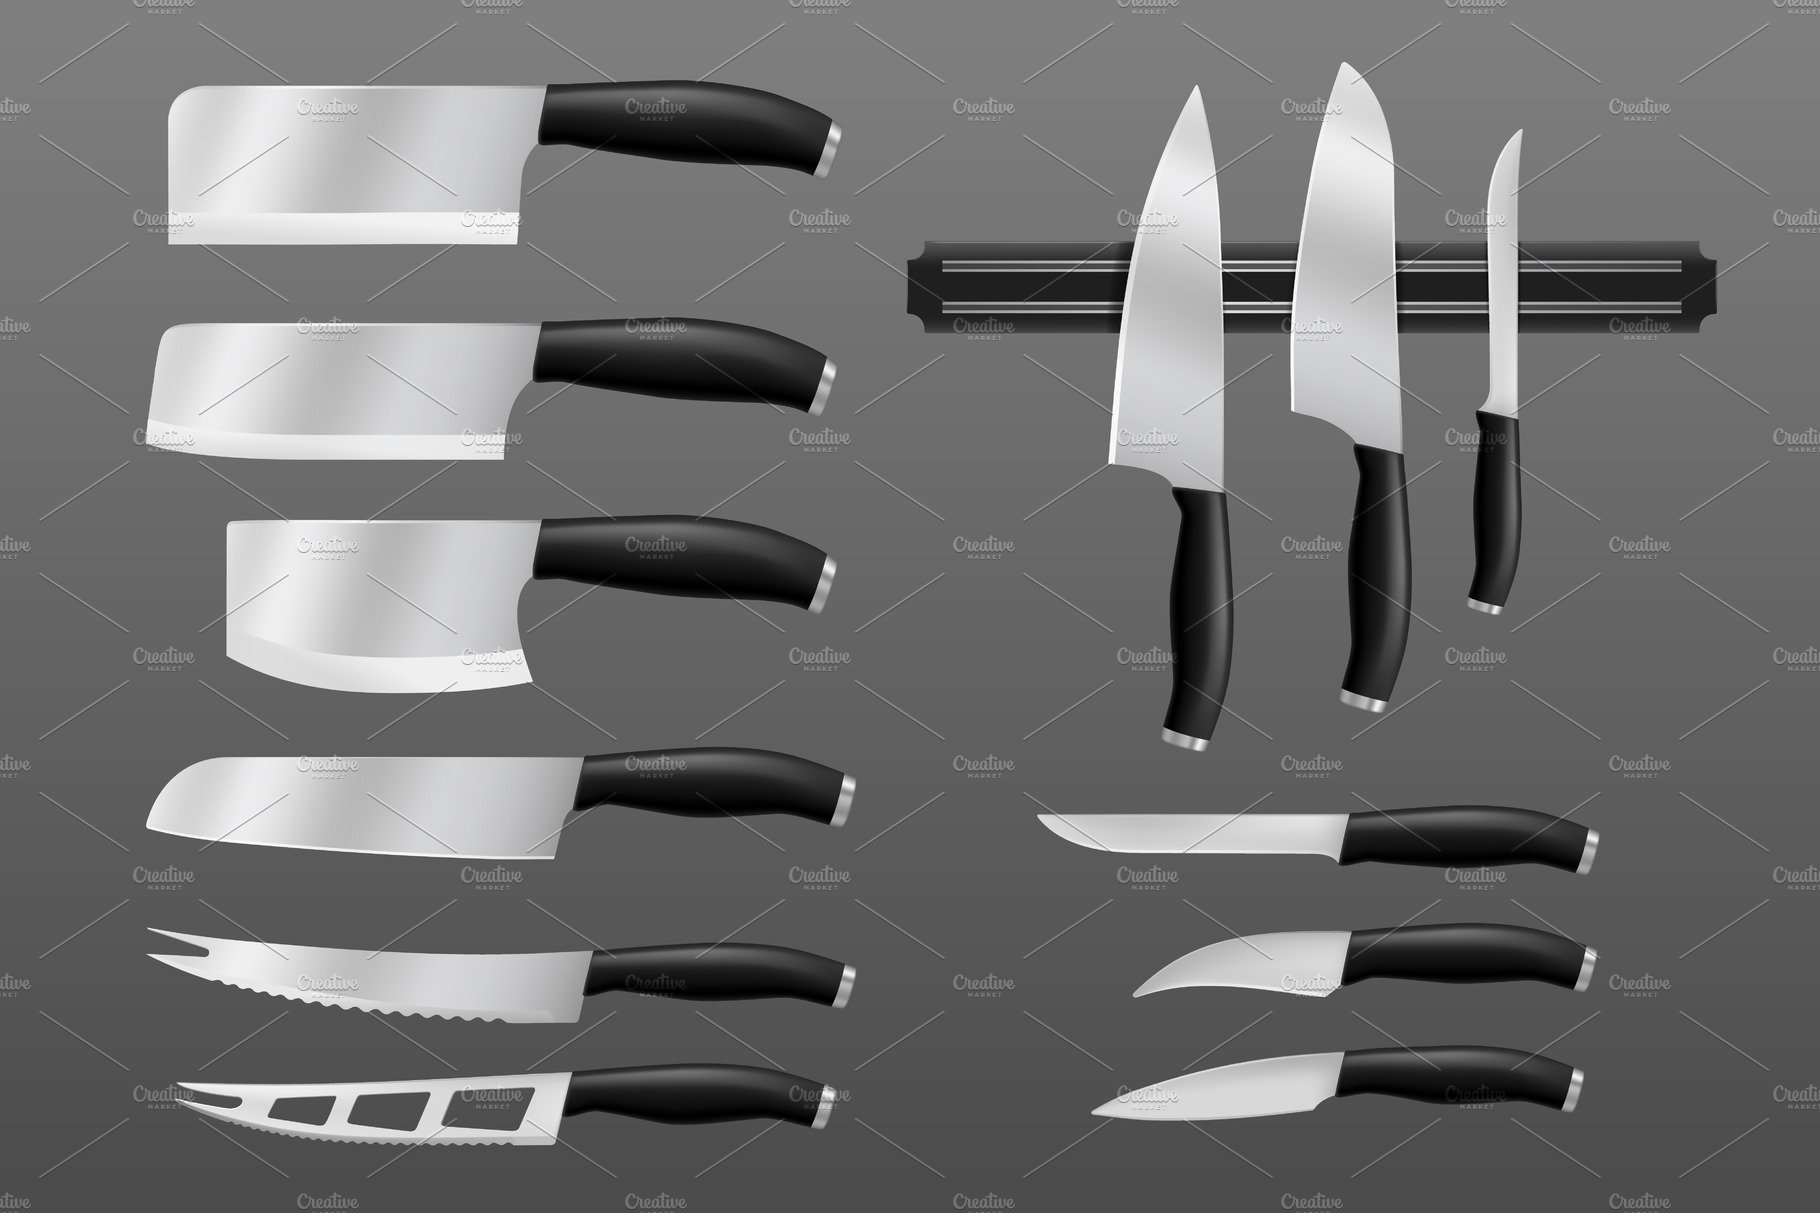 Kitchen cutlery, knifes cover image.